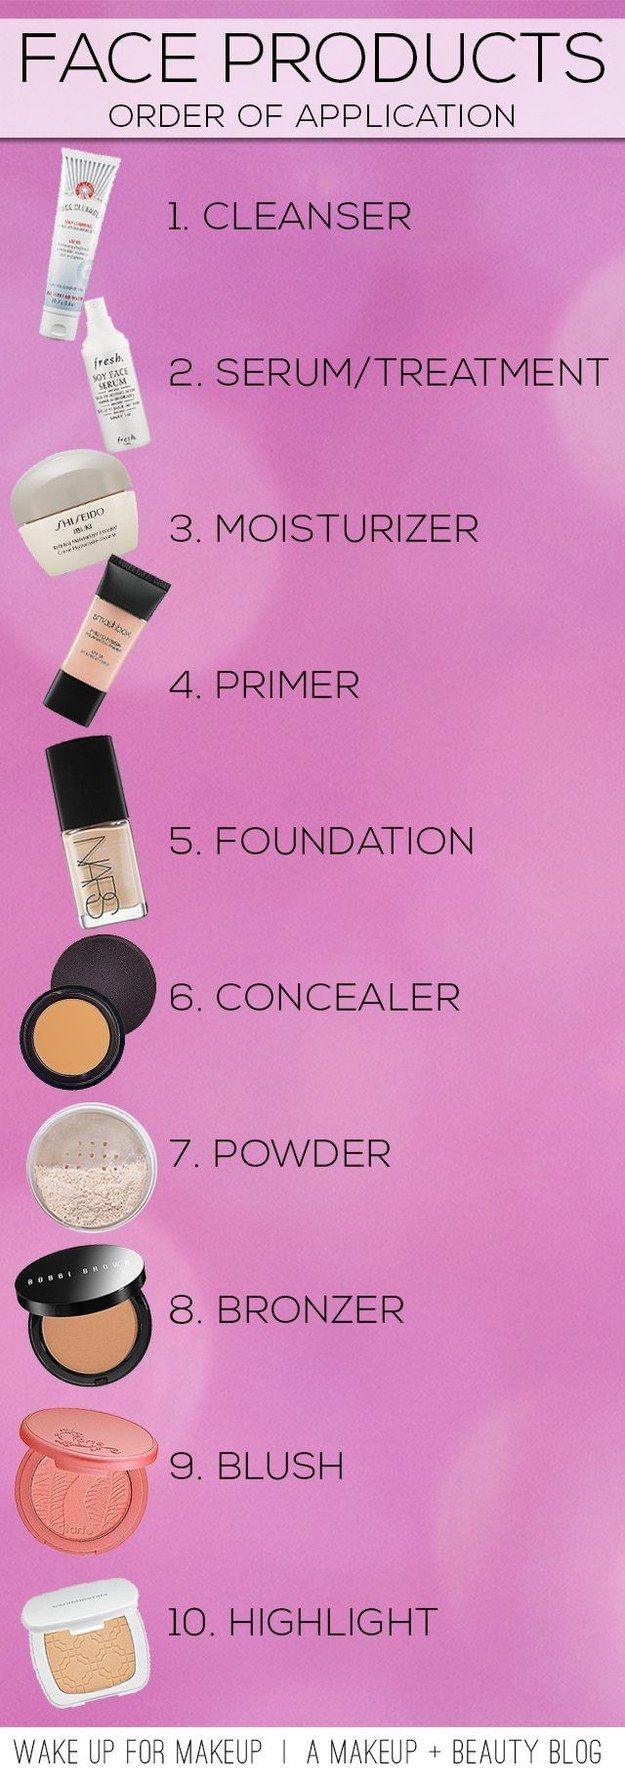 wedding makeup ideas - face products